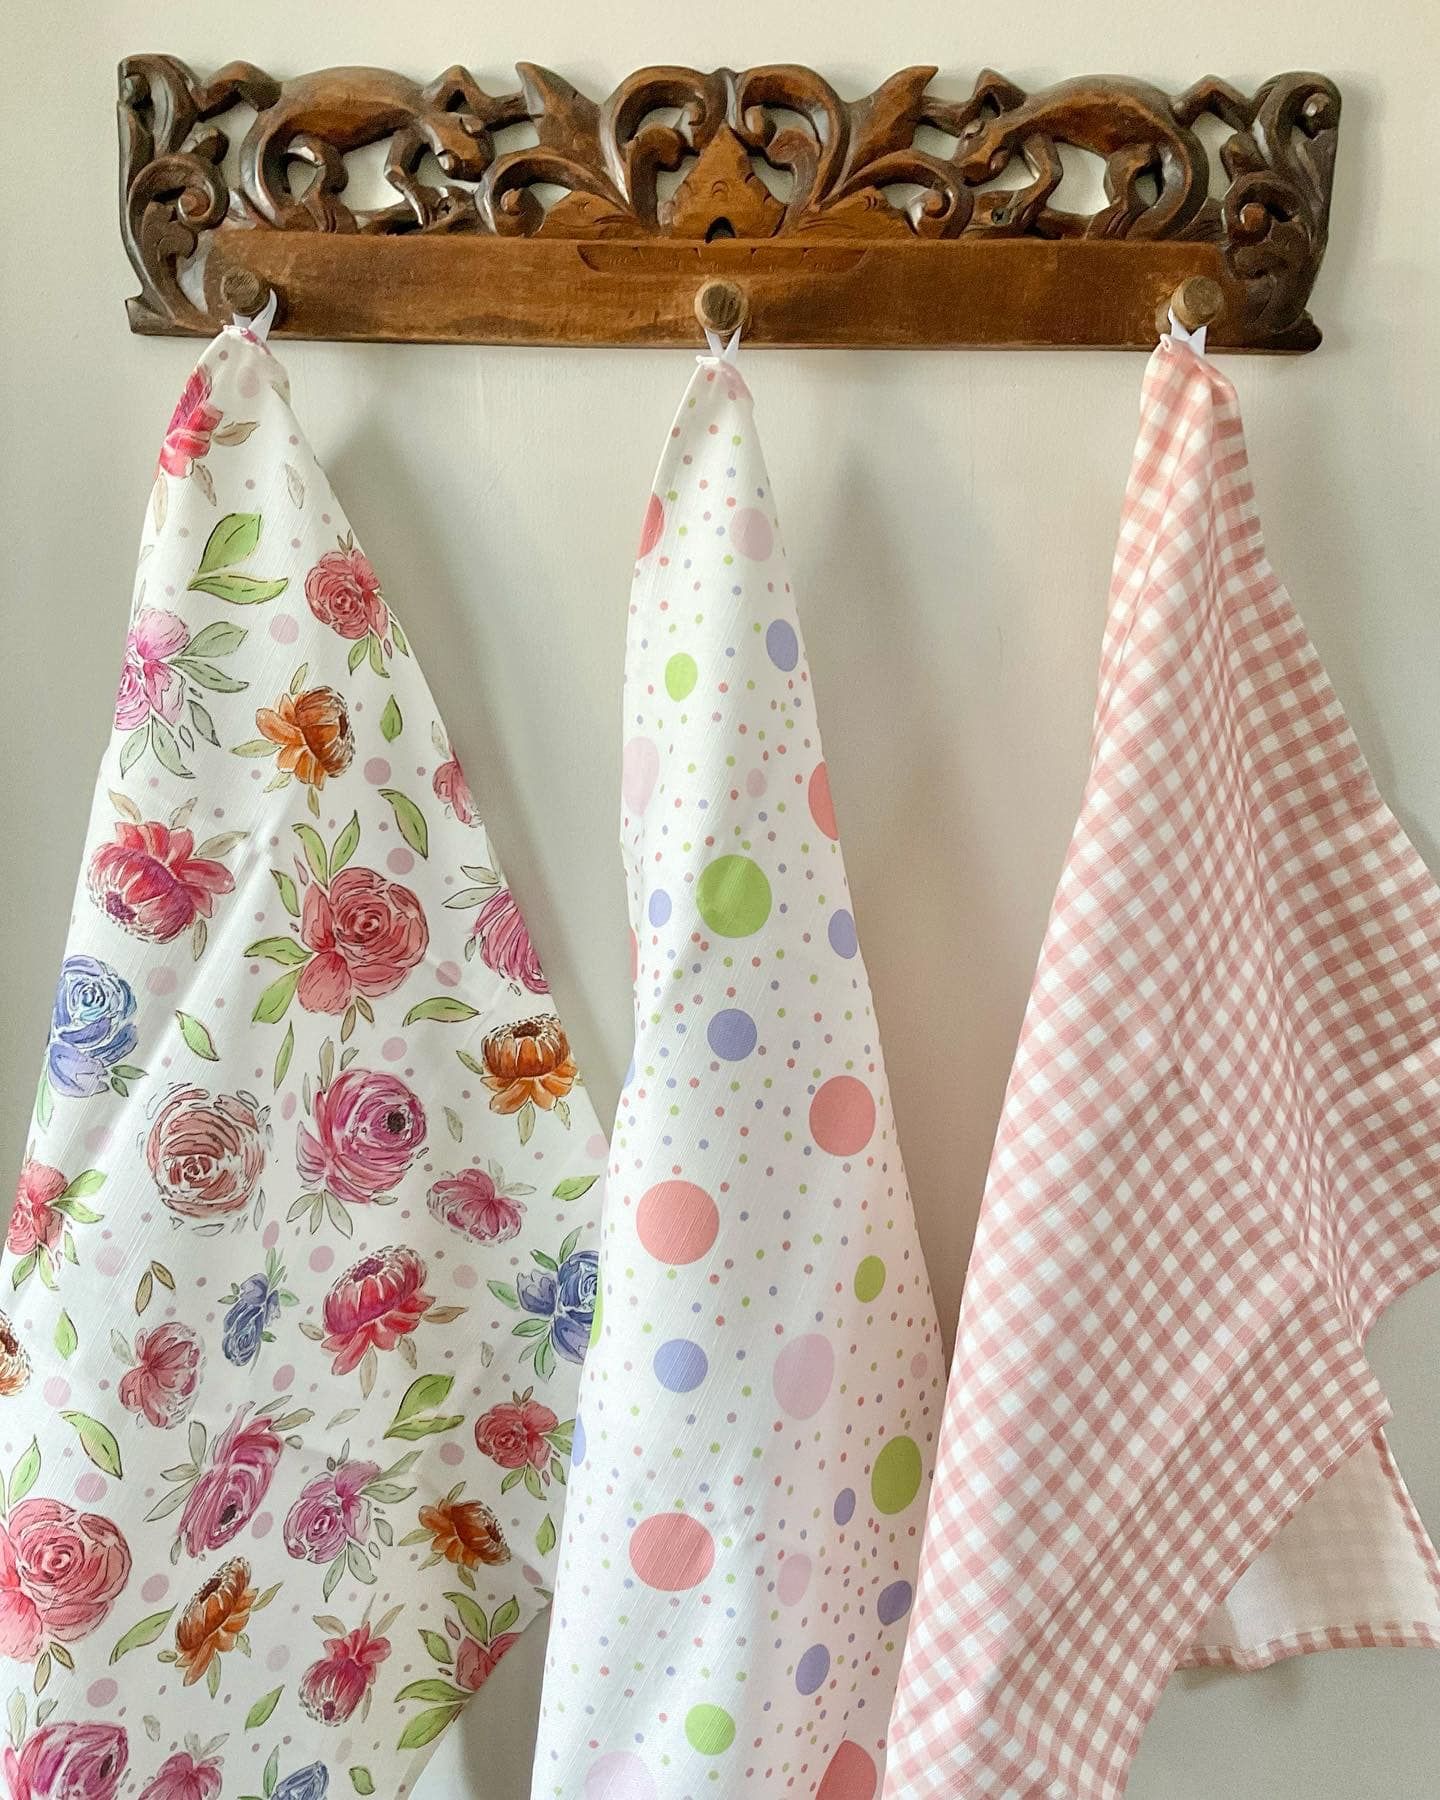 3 tea towels hanging on a rail. One has flowers on, one is polka dot and one is gingham